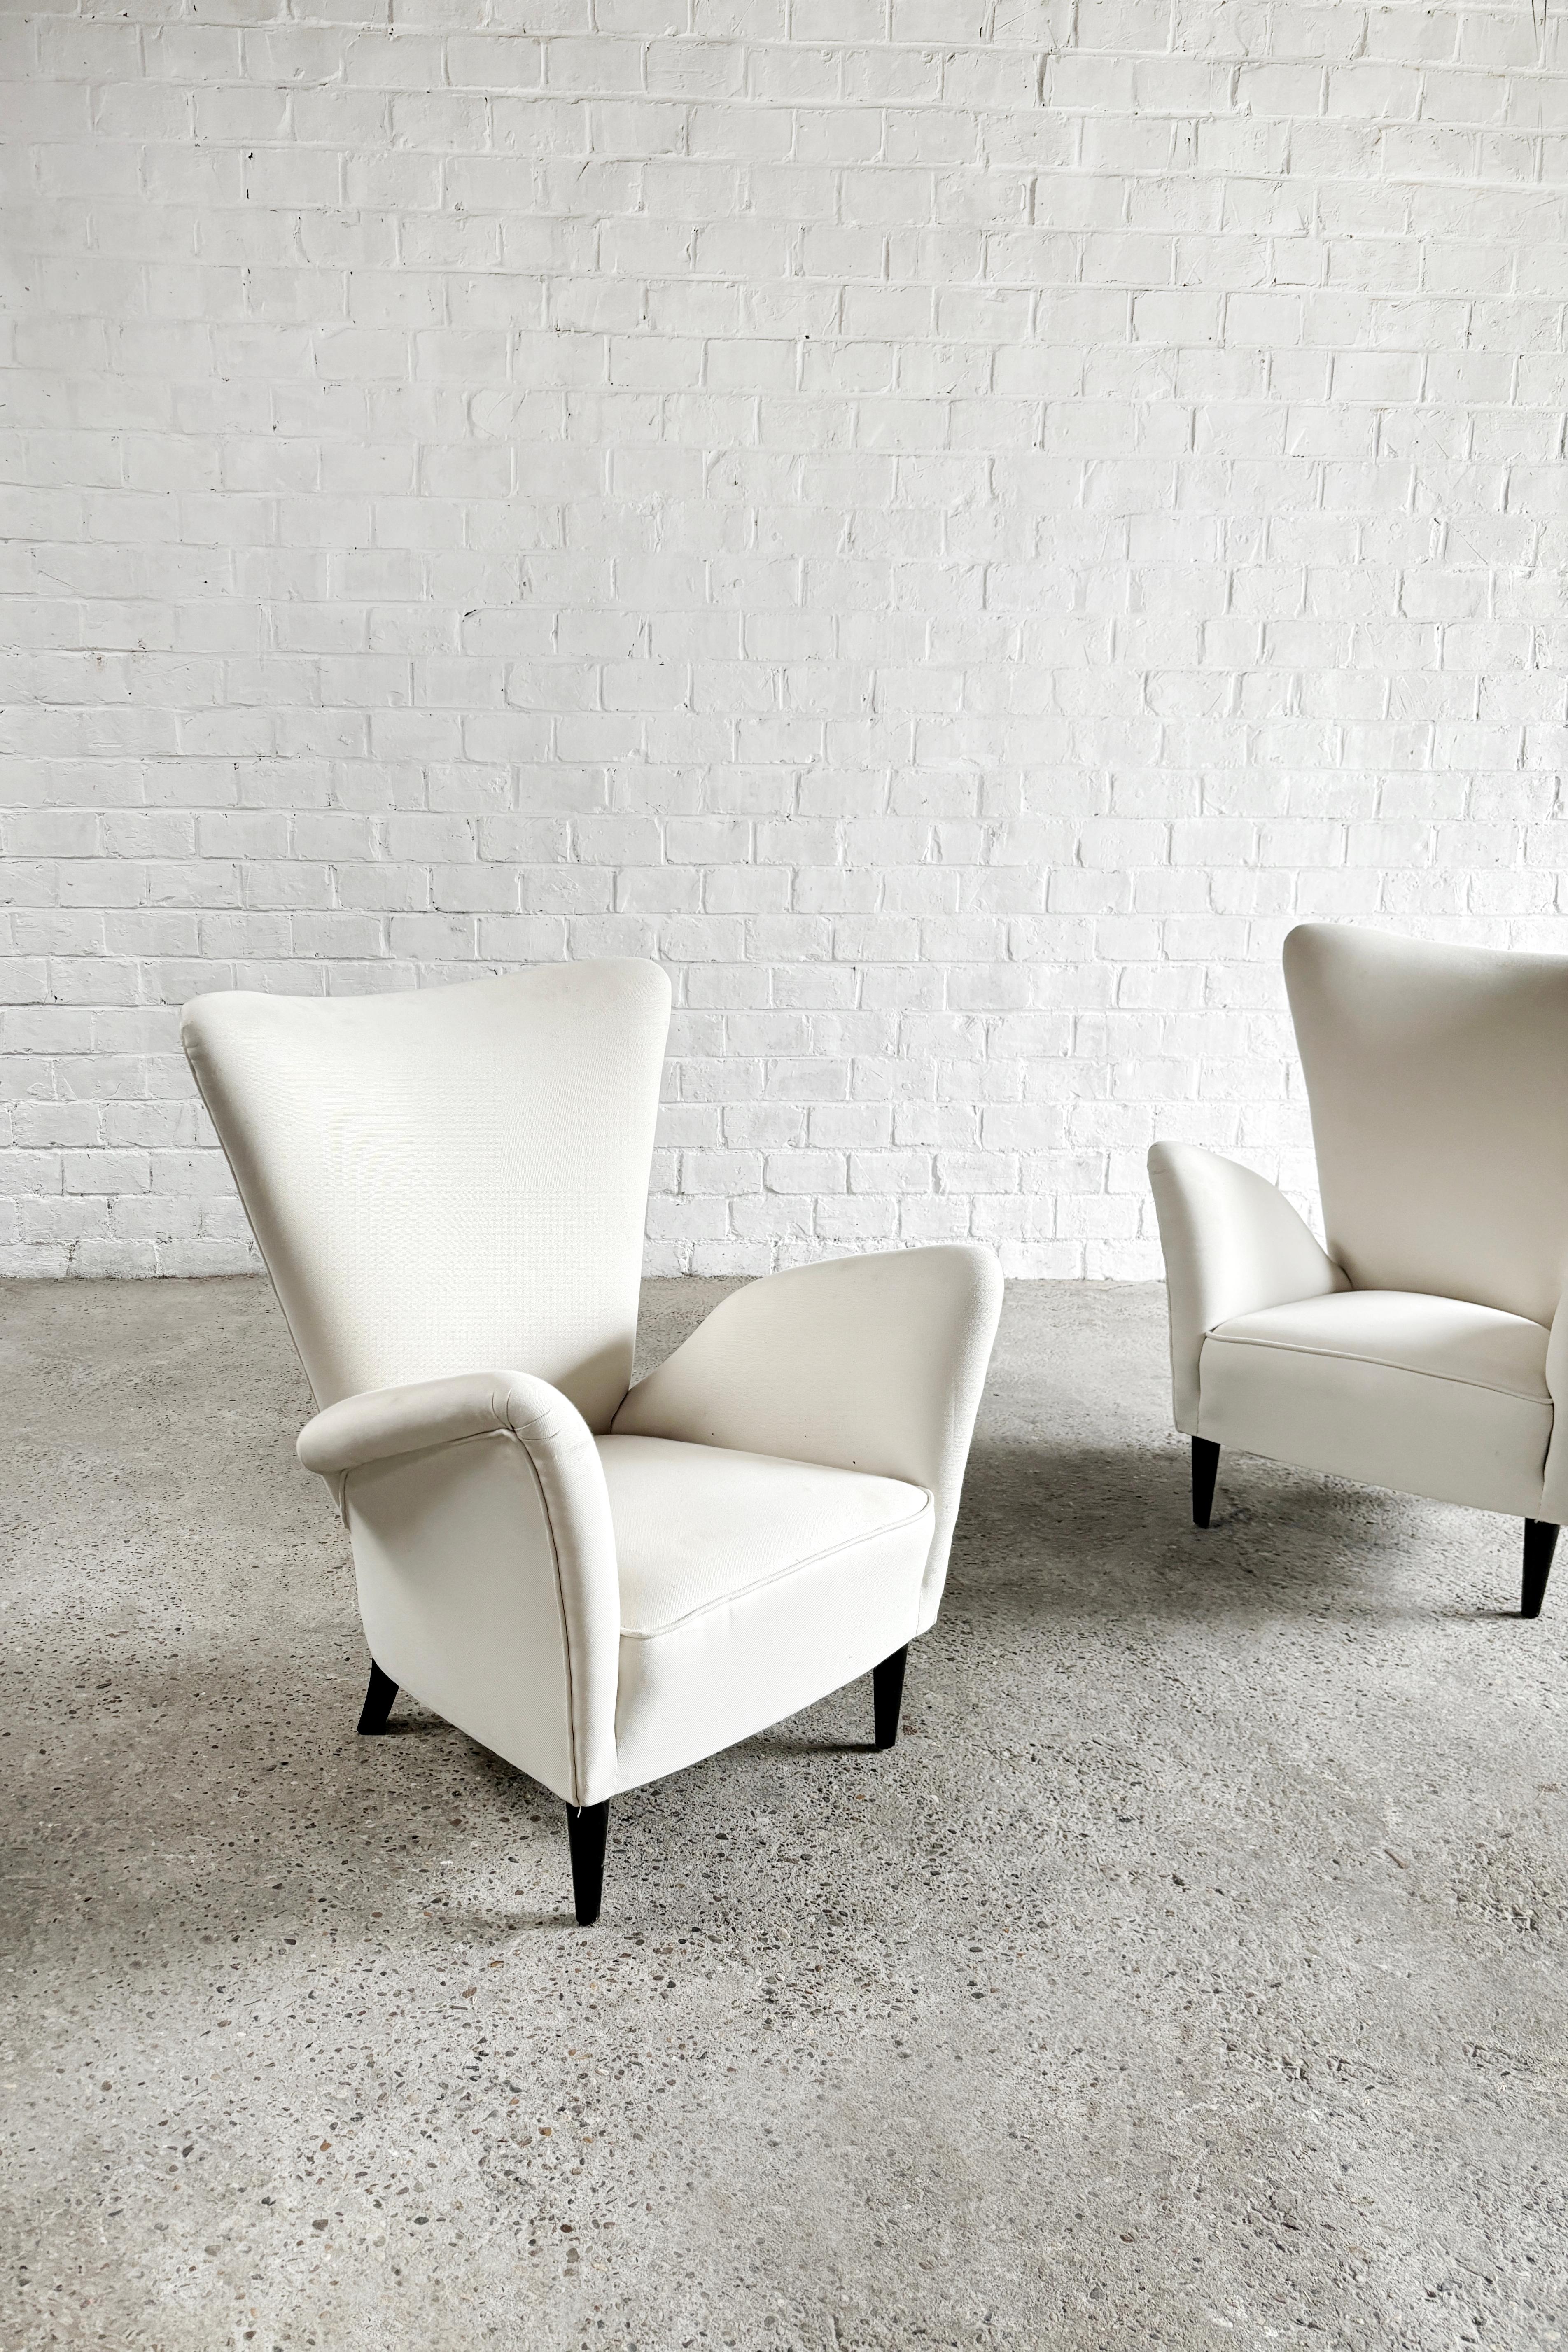 Mid-Century Modern Italian Armchairs By Gio Ponti For Hotel Bristol Merano, 1950's For Sale